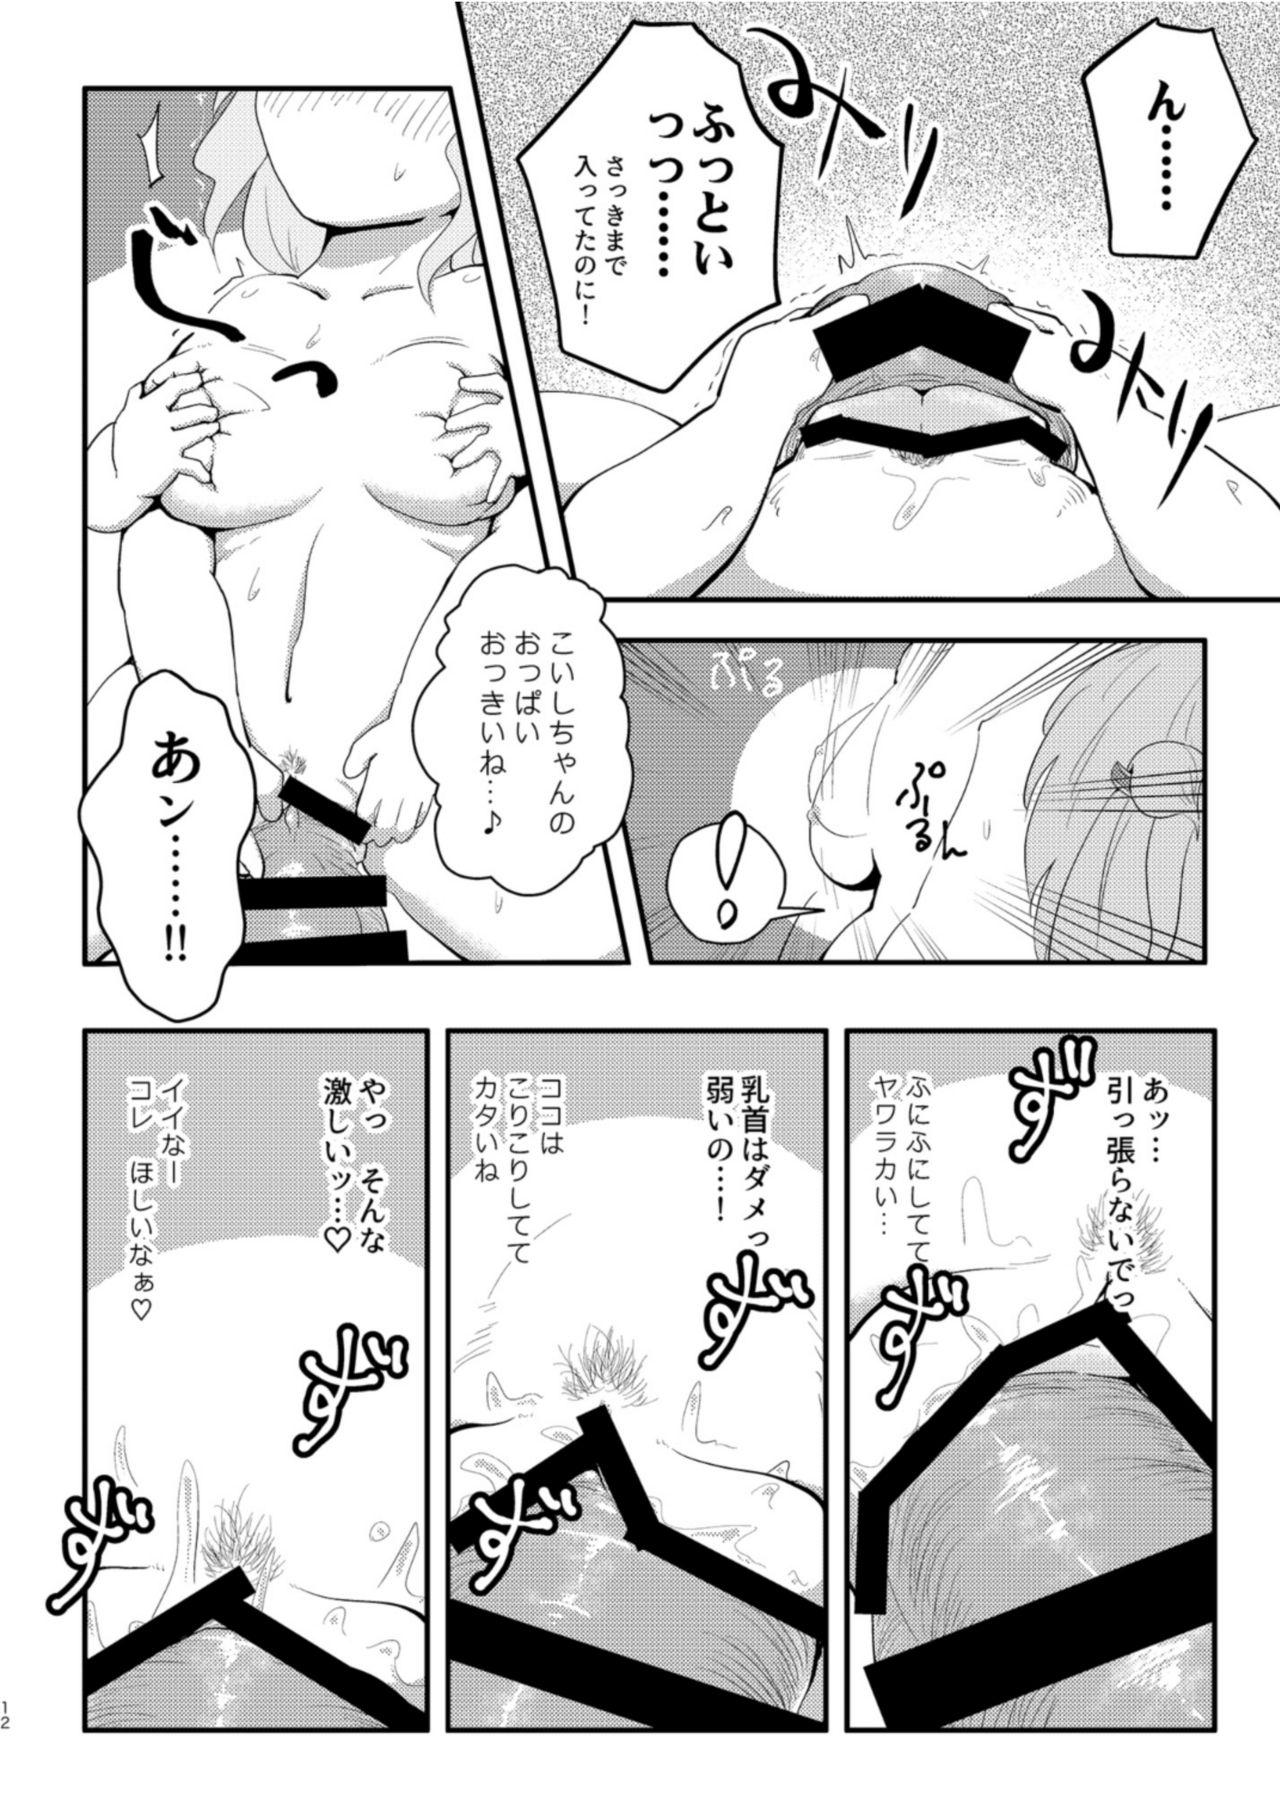 Anal Gape Scarlet Conflict 3 - Touhou project Prima - Page 12